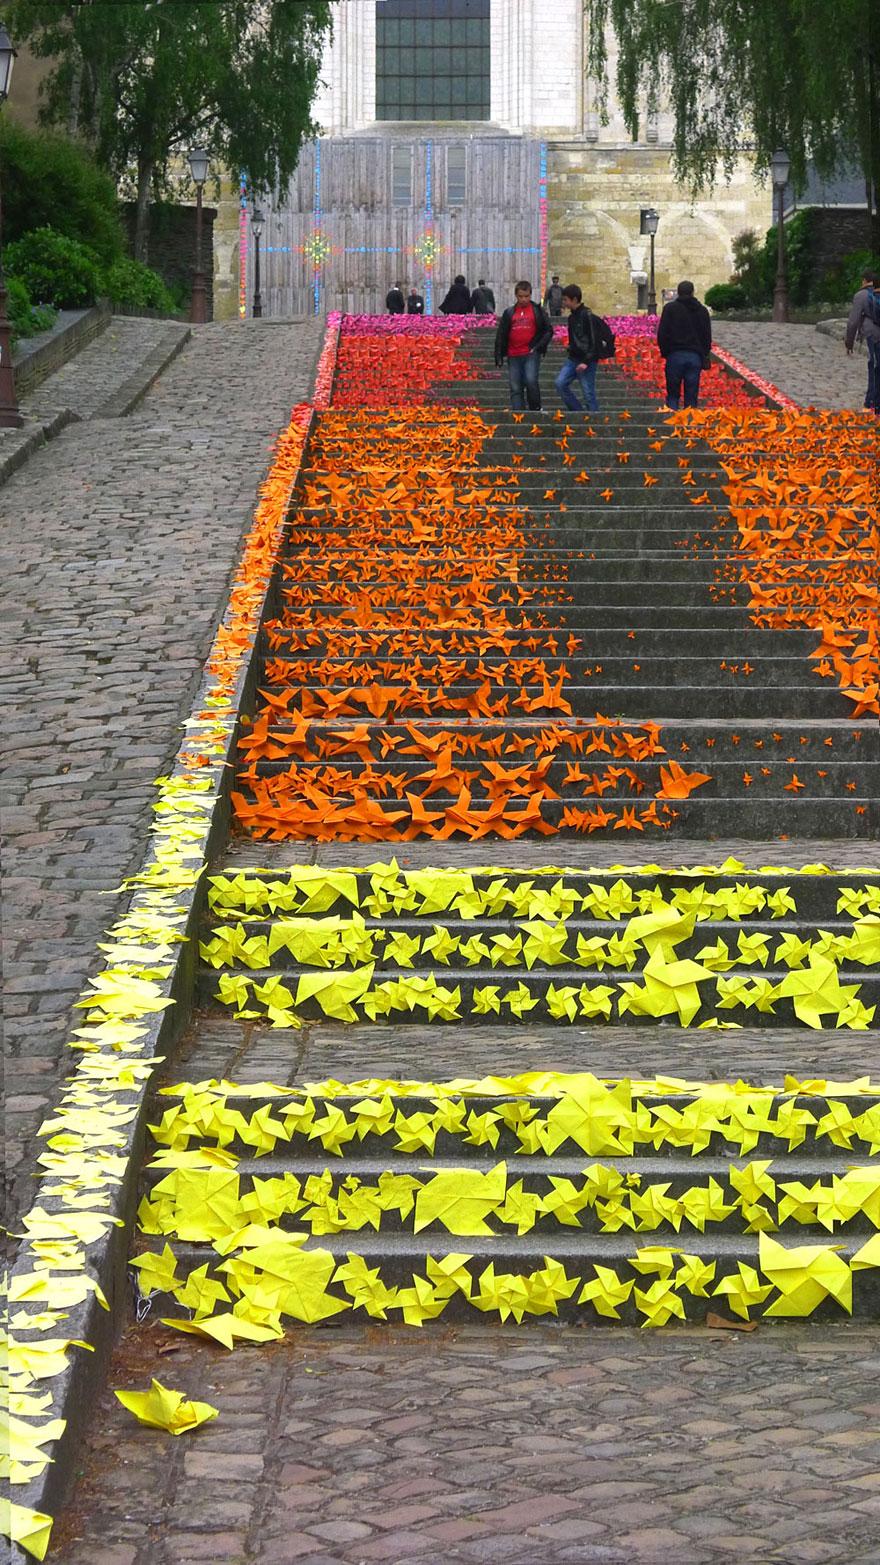 3D stair art in Angers, France.